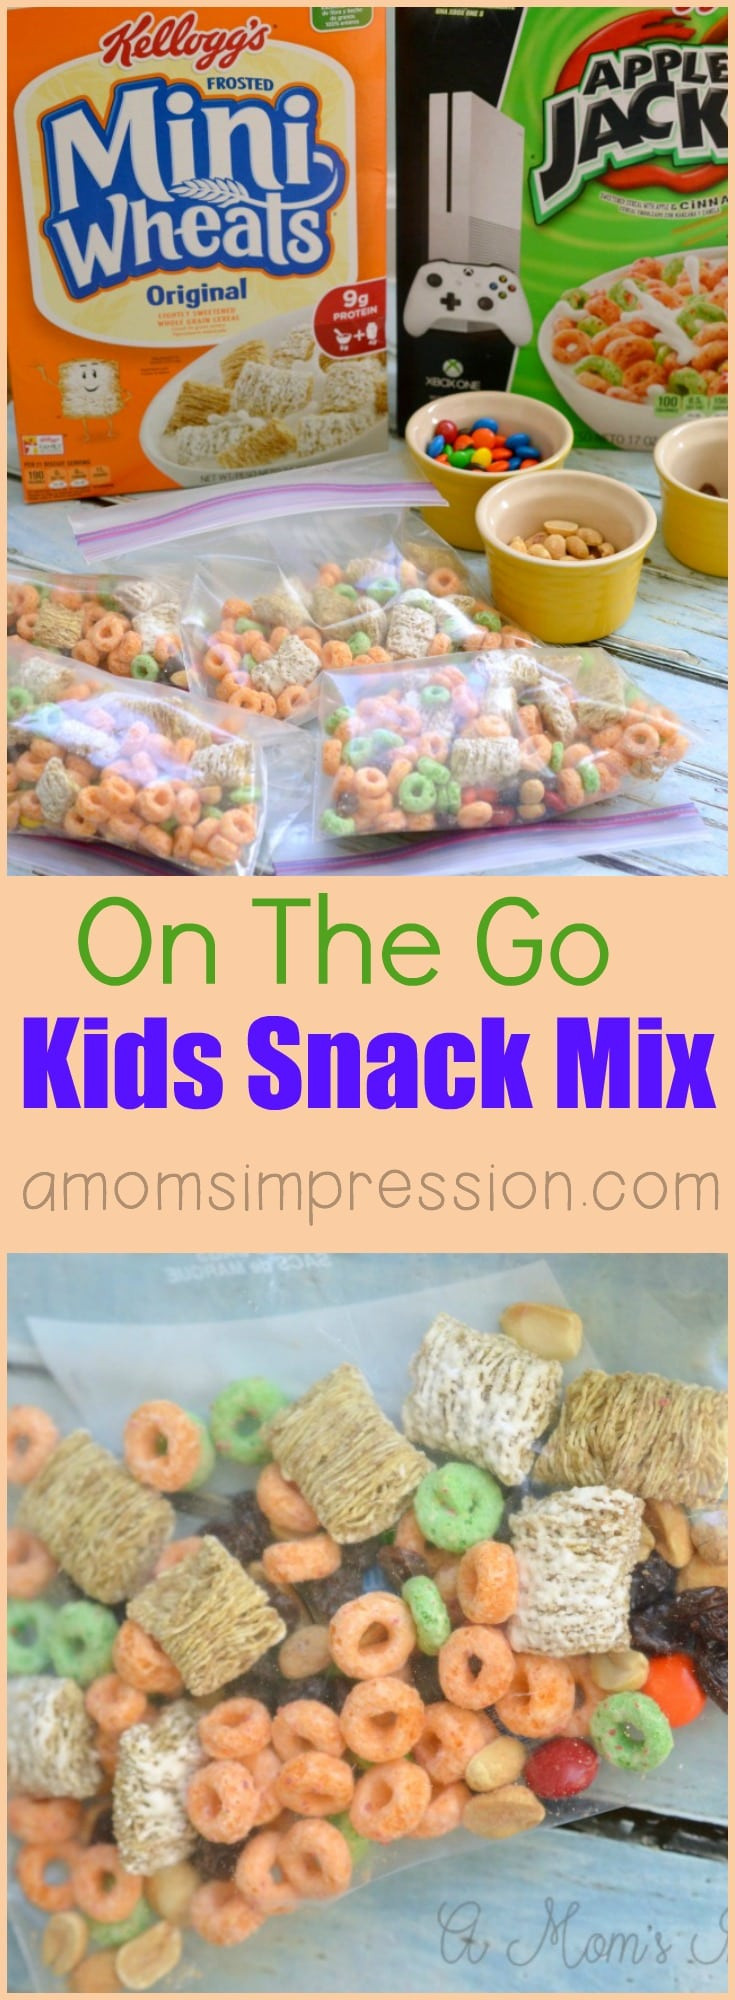 Snack Mix Recipes For Kids
 Fast Snack Recipes on the go Kids Snack Mix Recipe